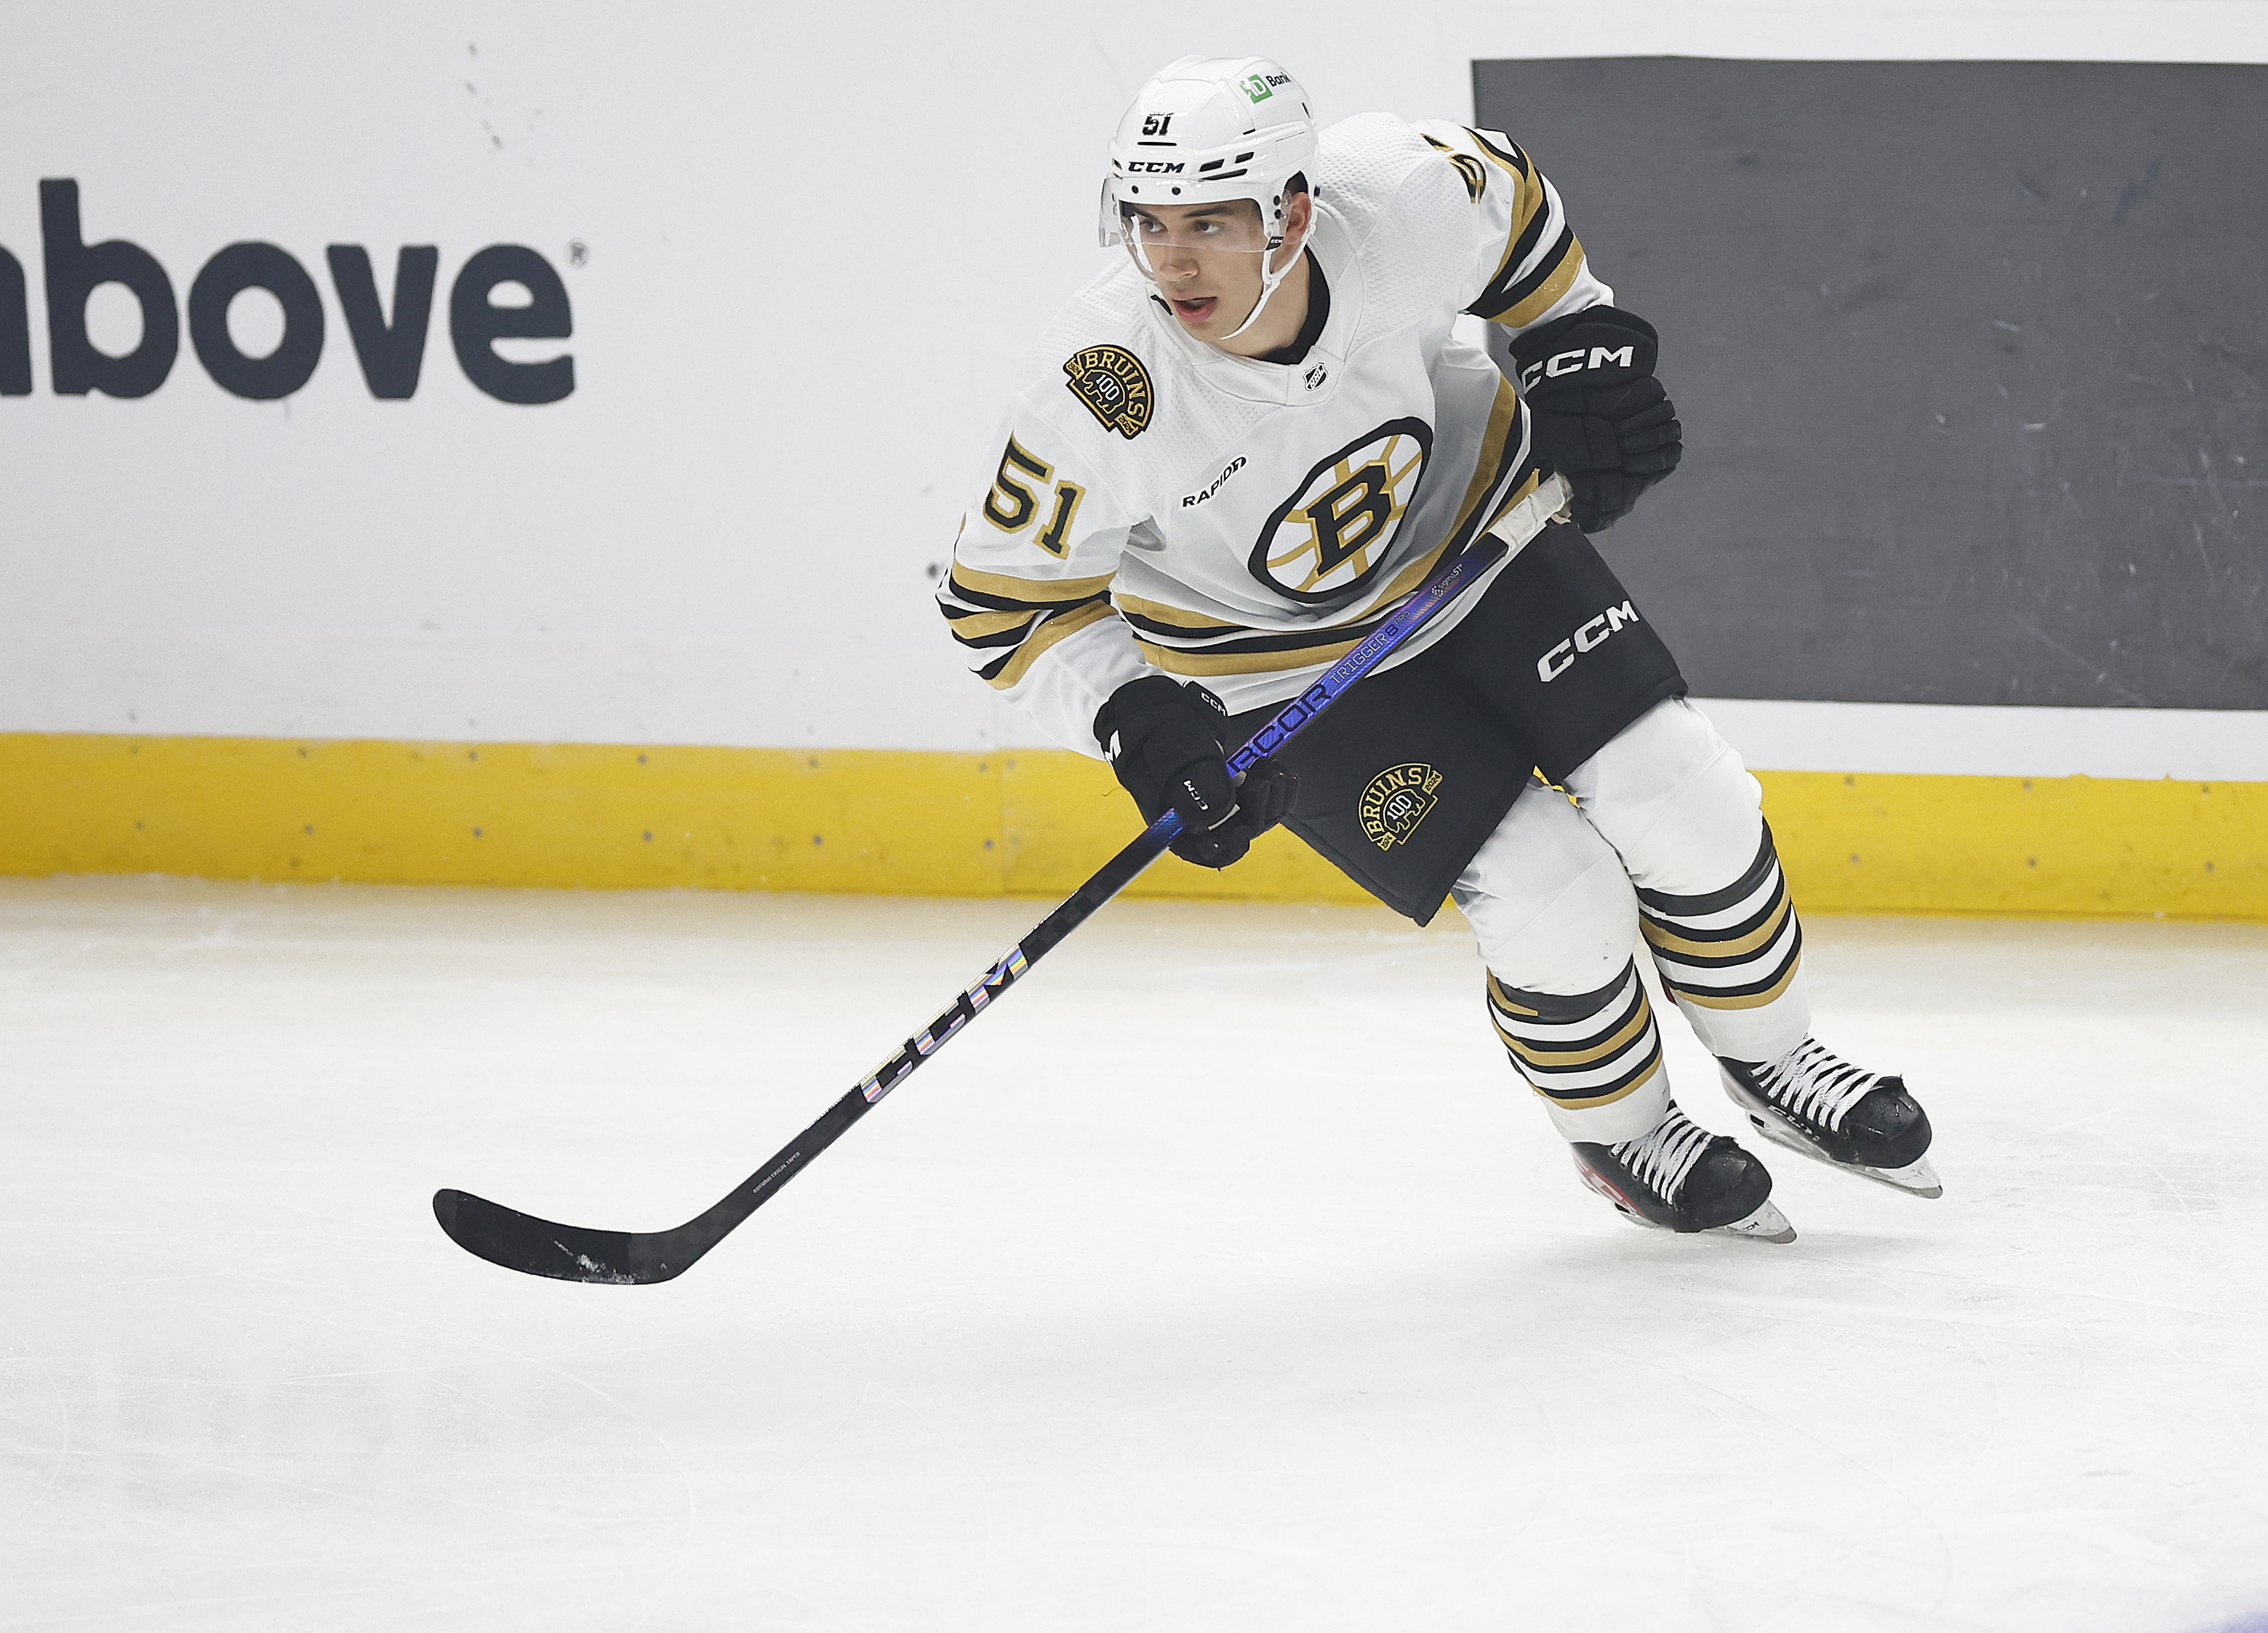 Plenty of excitement during first round of NHL Draft, while Bruins watch  from the sidelines - The Boston Globe